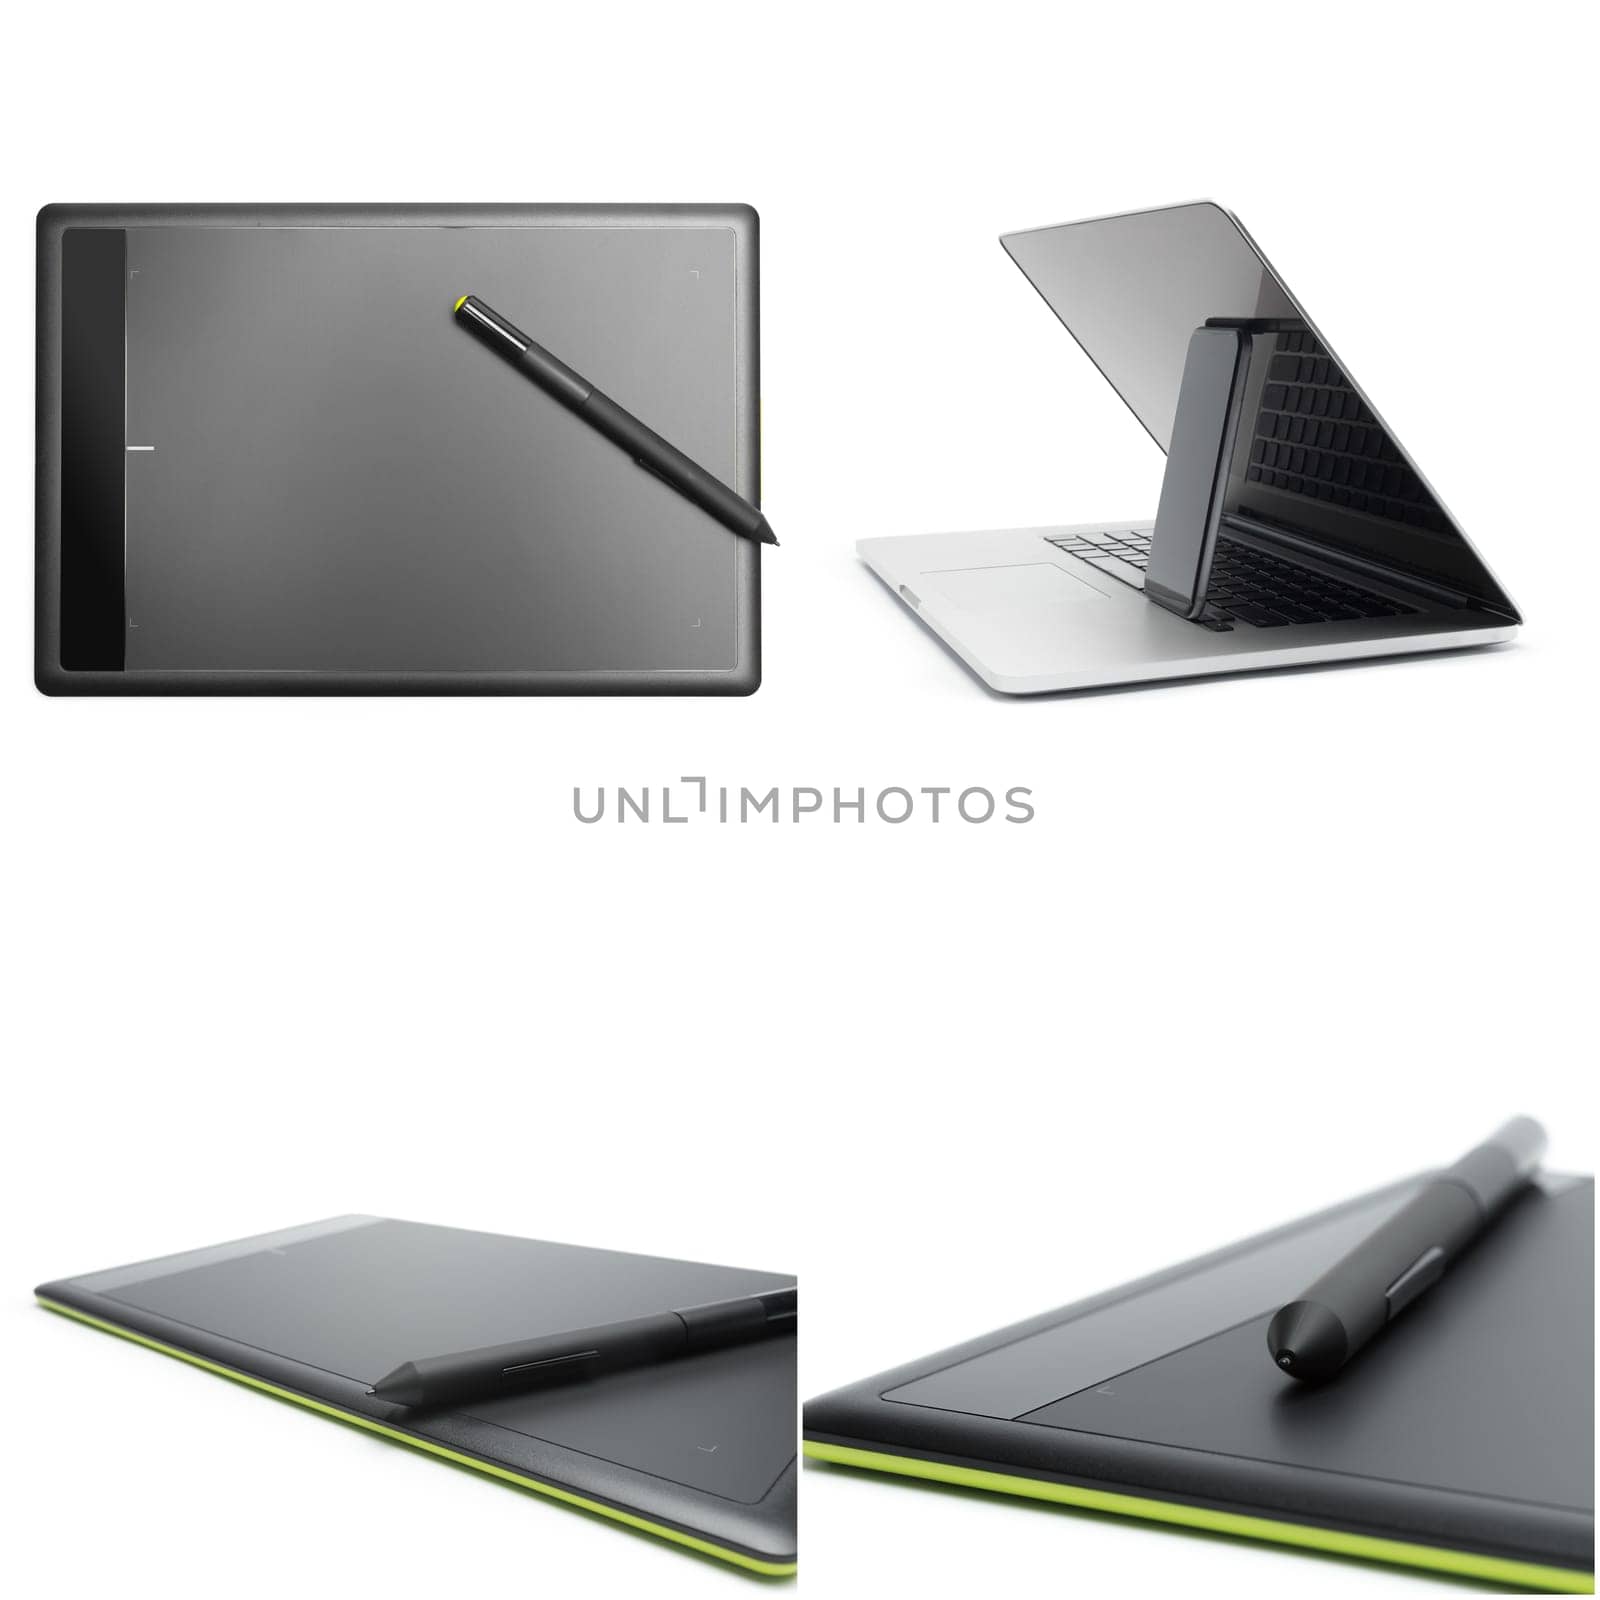 graphic tablet with pen for illustrators and designers, isolated on white background. by Fabrikasimf